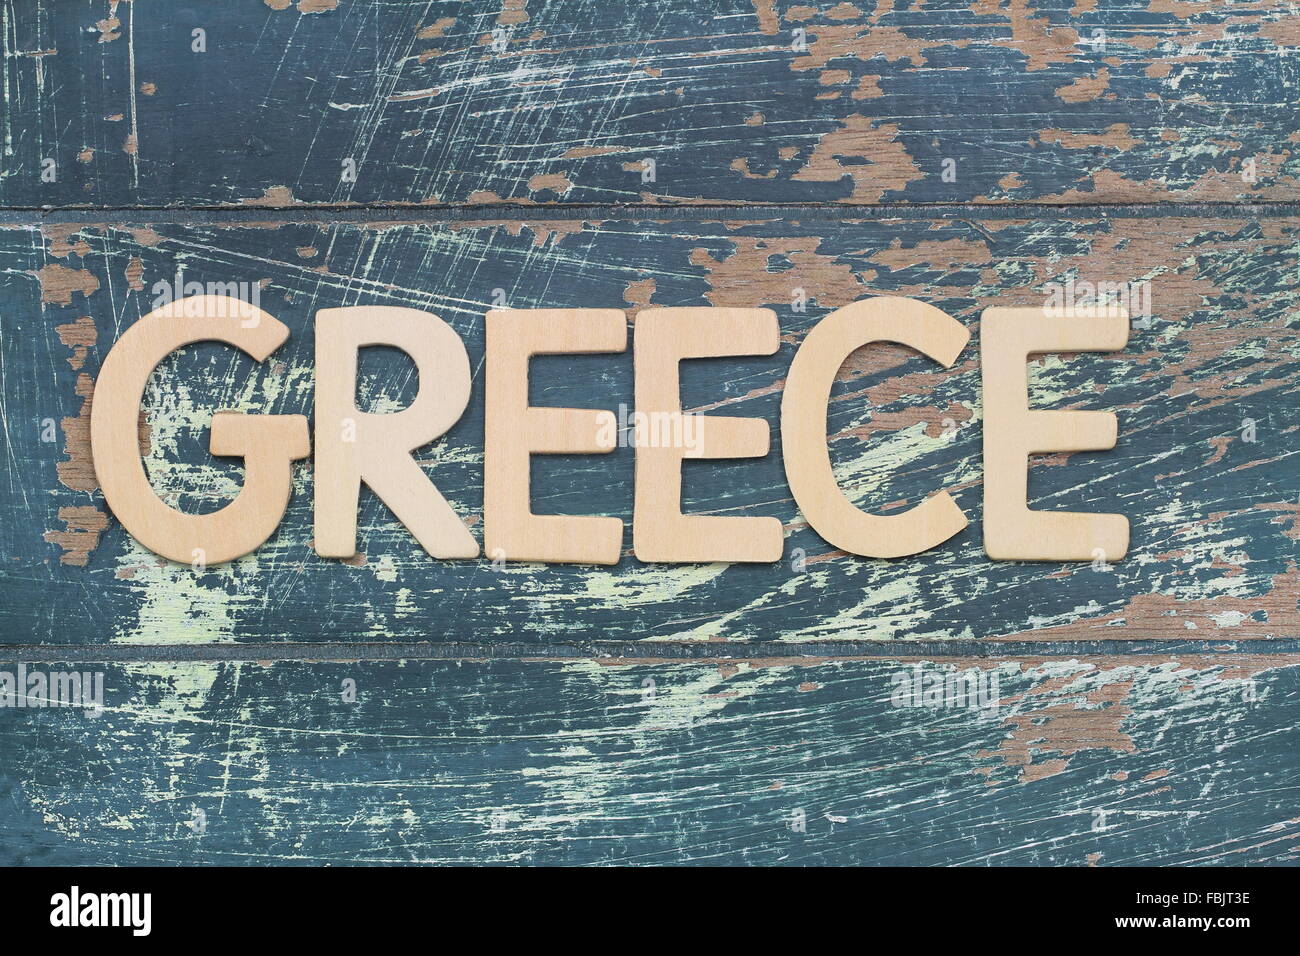 Greece written with wooden letters on rustic surface Stock Photo